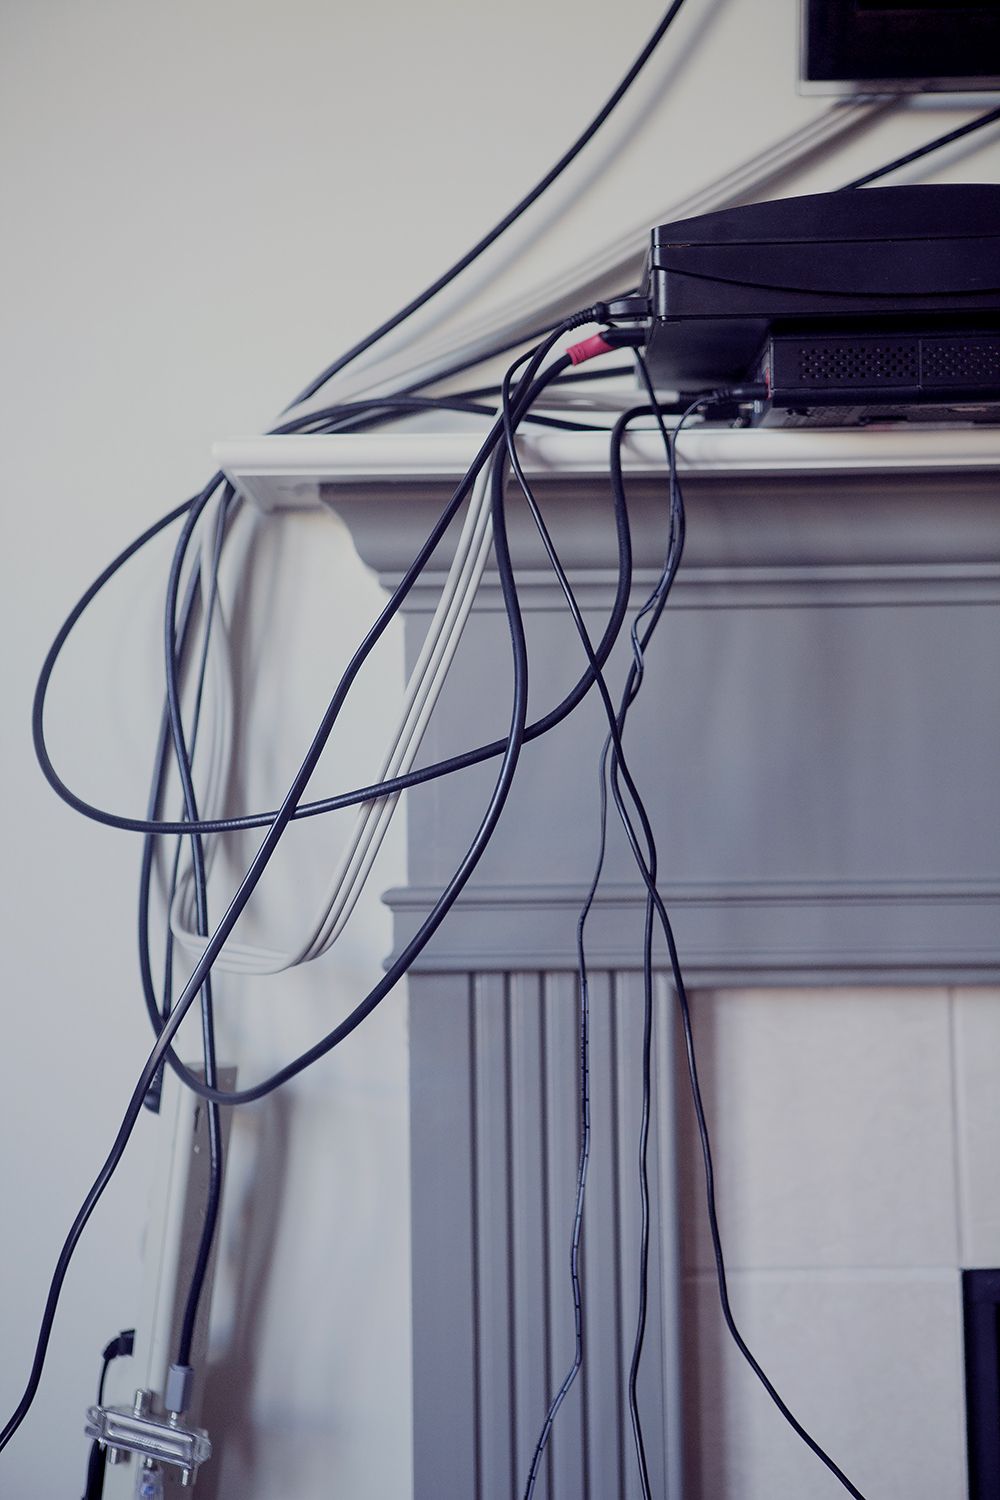 Hide Tv Wires How To Cords, How To Hide Electrical Wiring